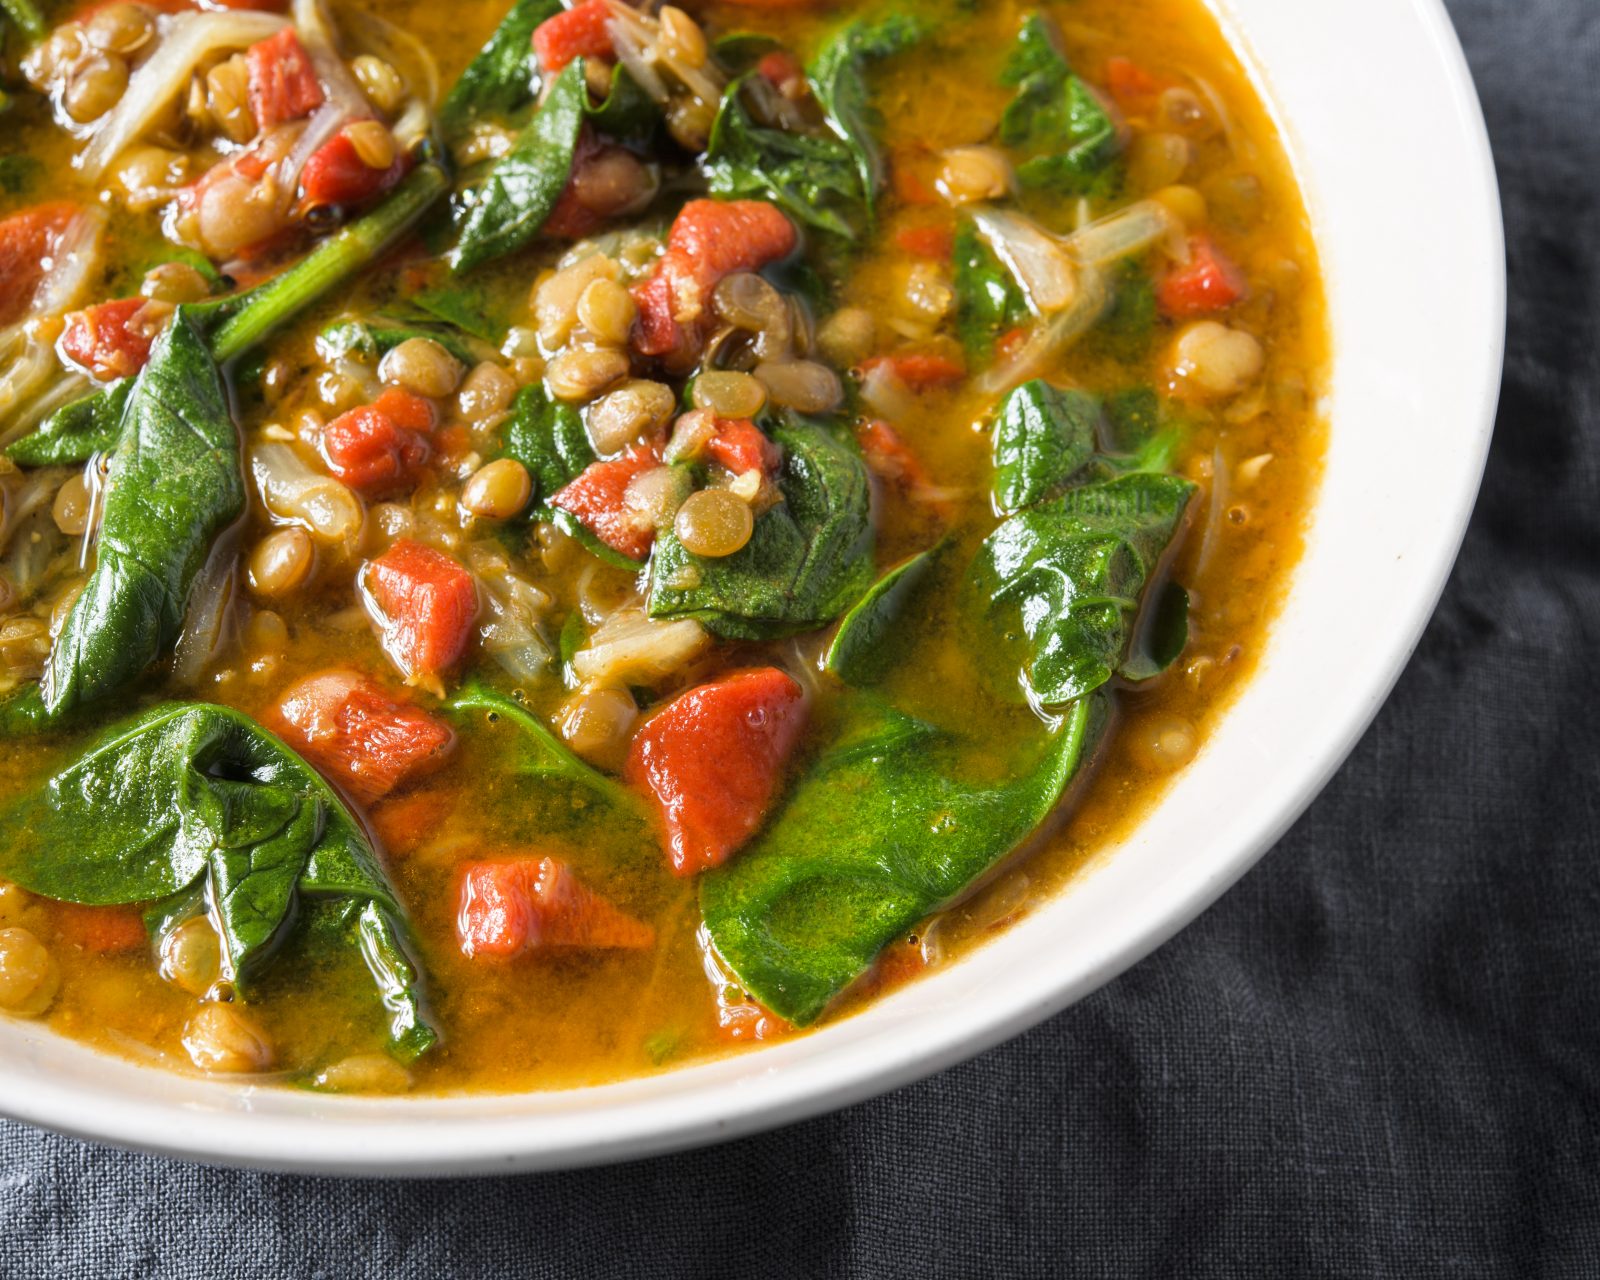 Spinach green lentil soup roasted peppers h